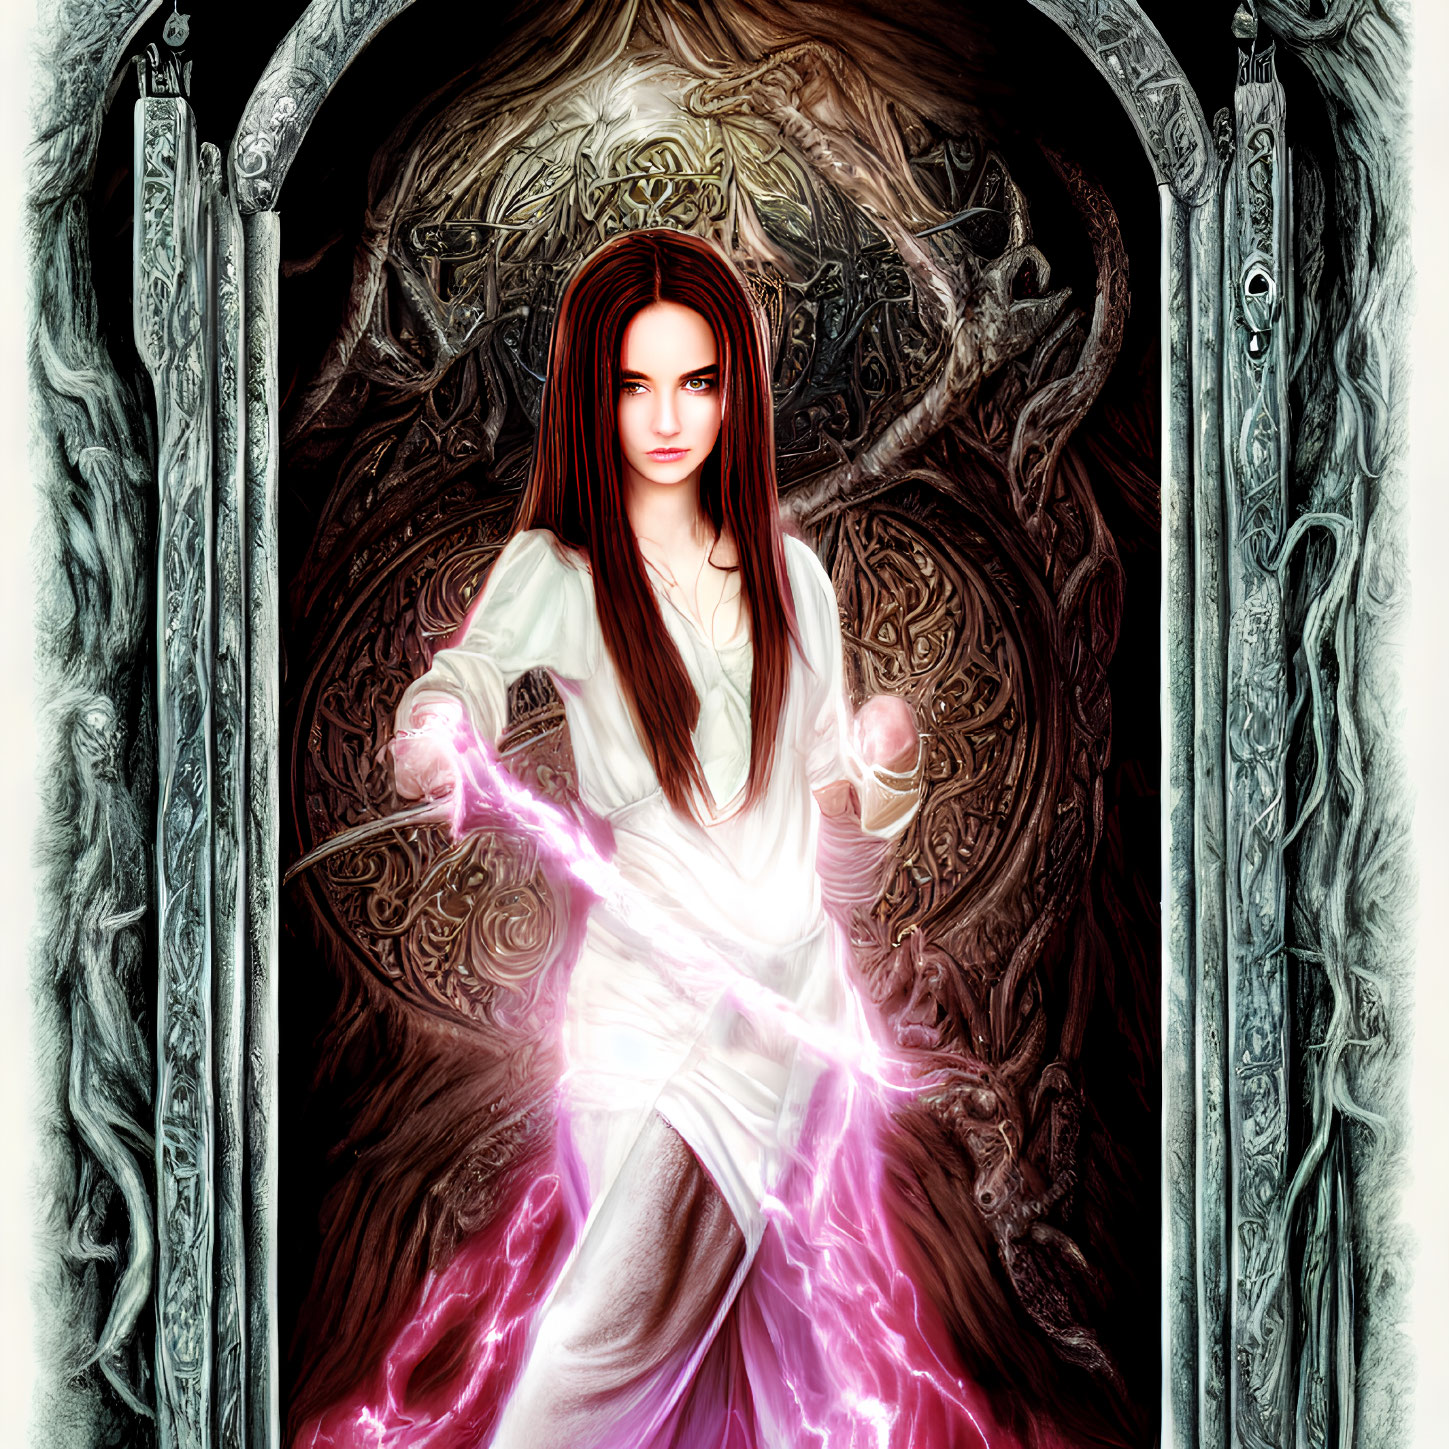 Fantasy artwork featuring woman with dark hair and purple magical energy by ornate archway